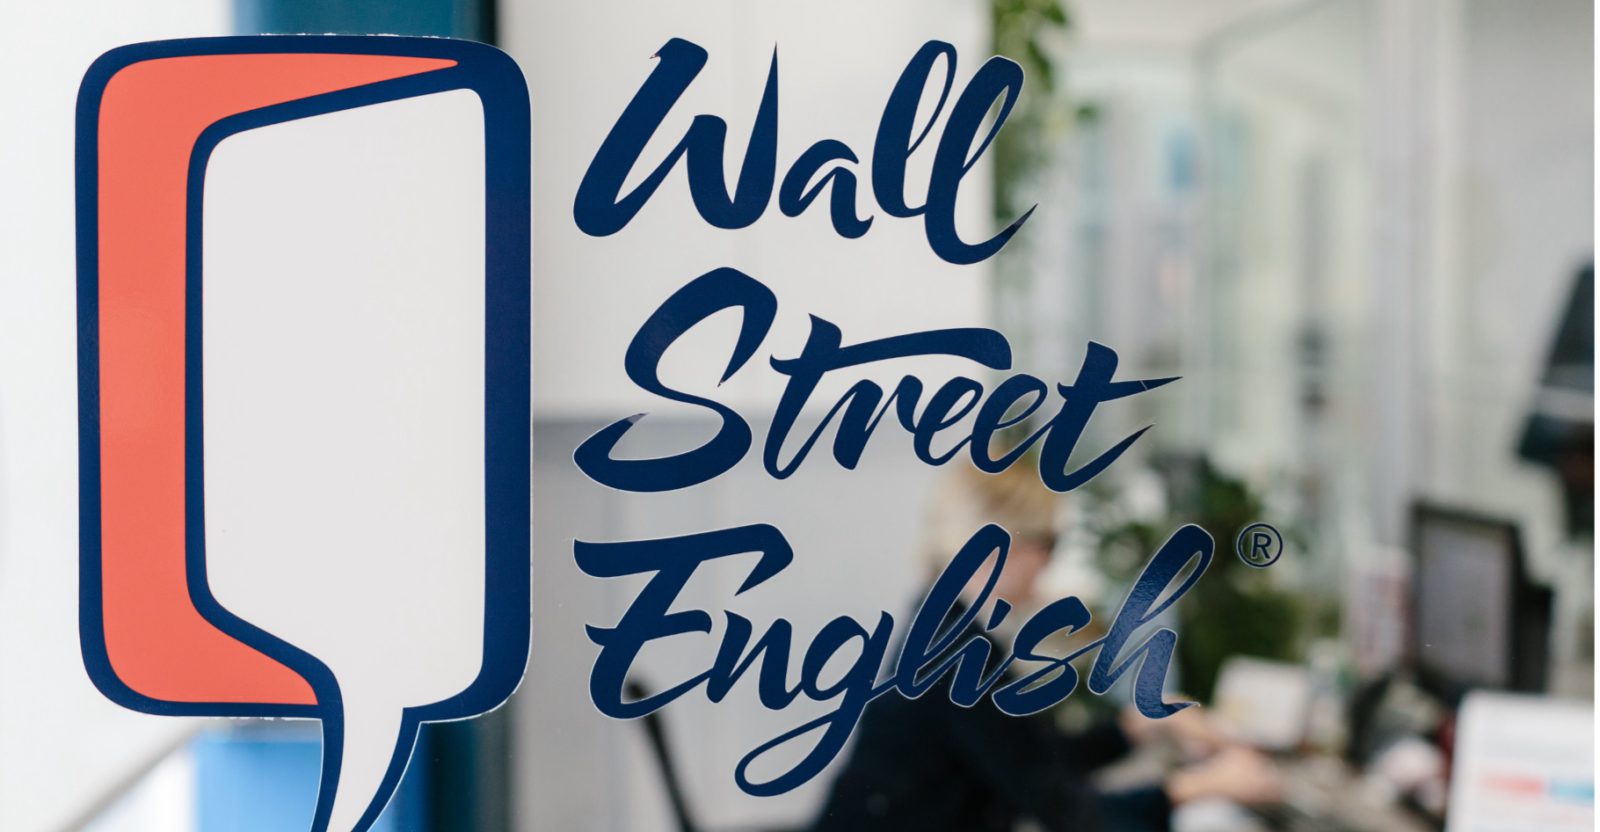 Need to improve your English?  The Wall Street English method will help you!